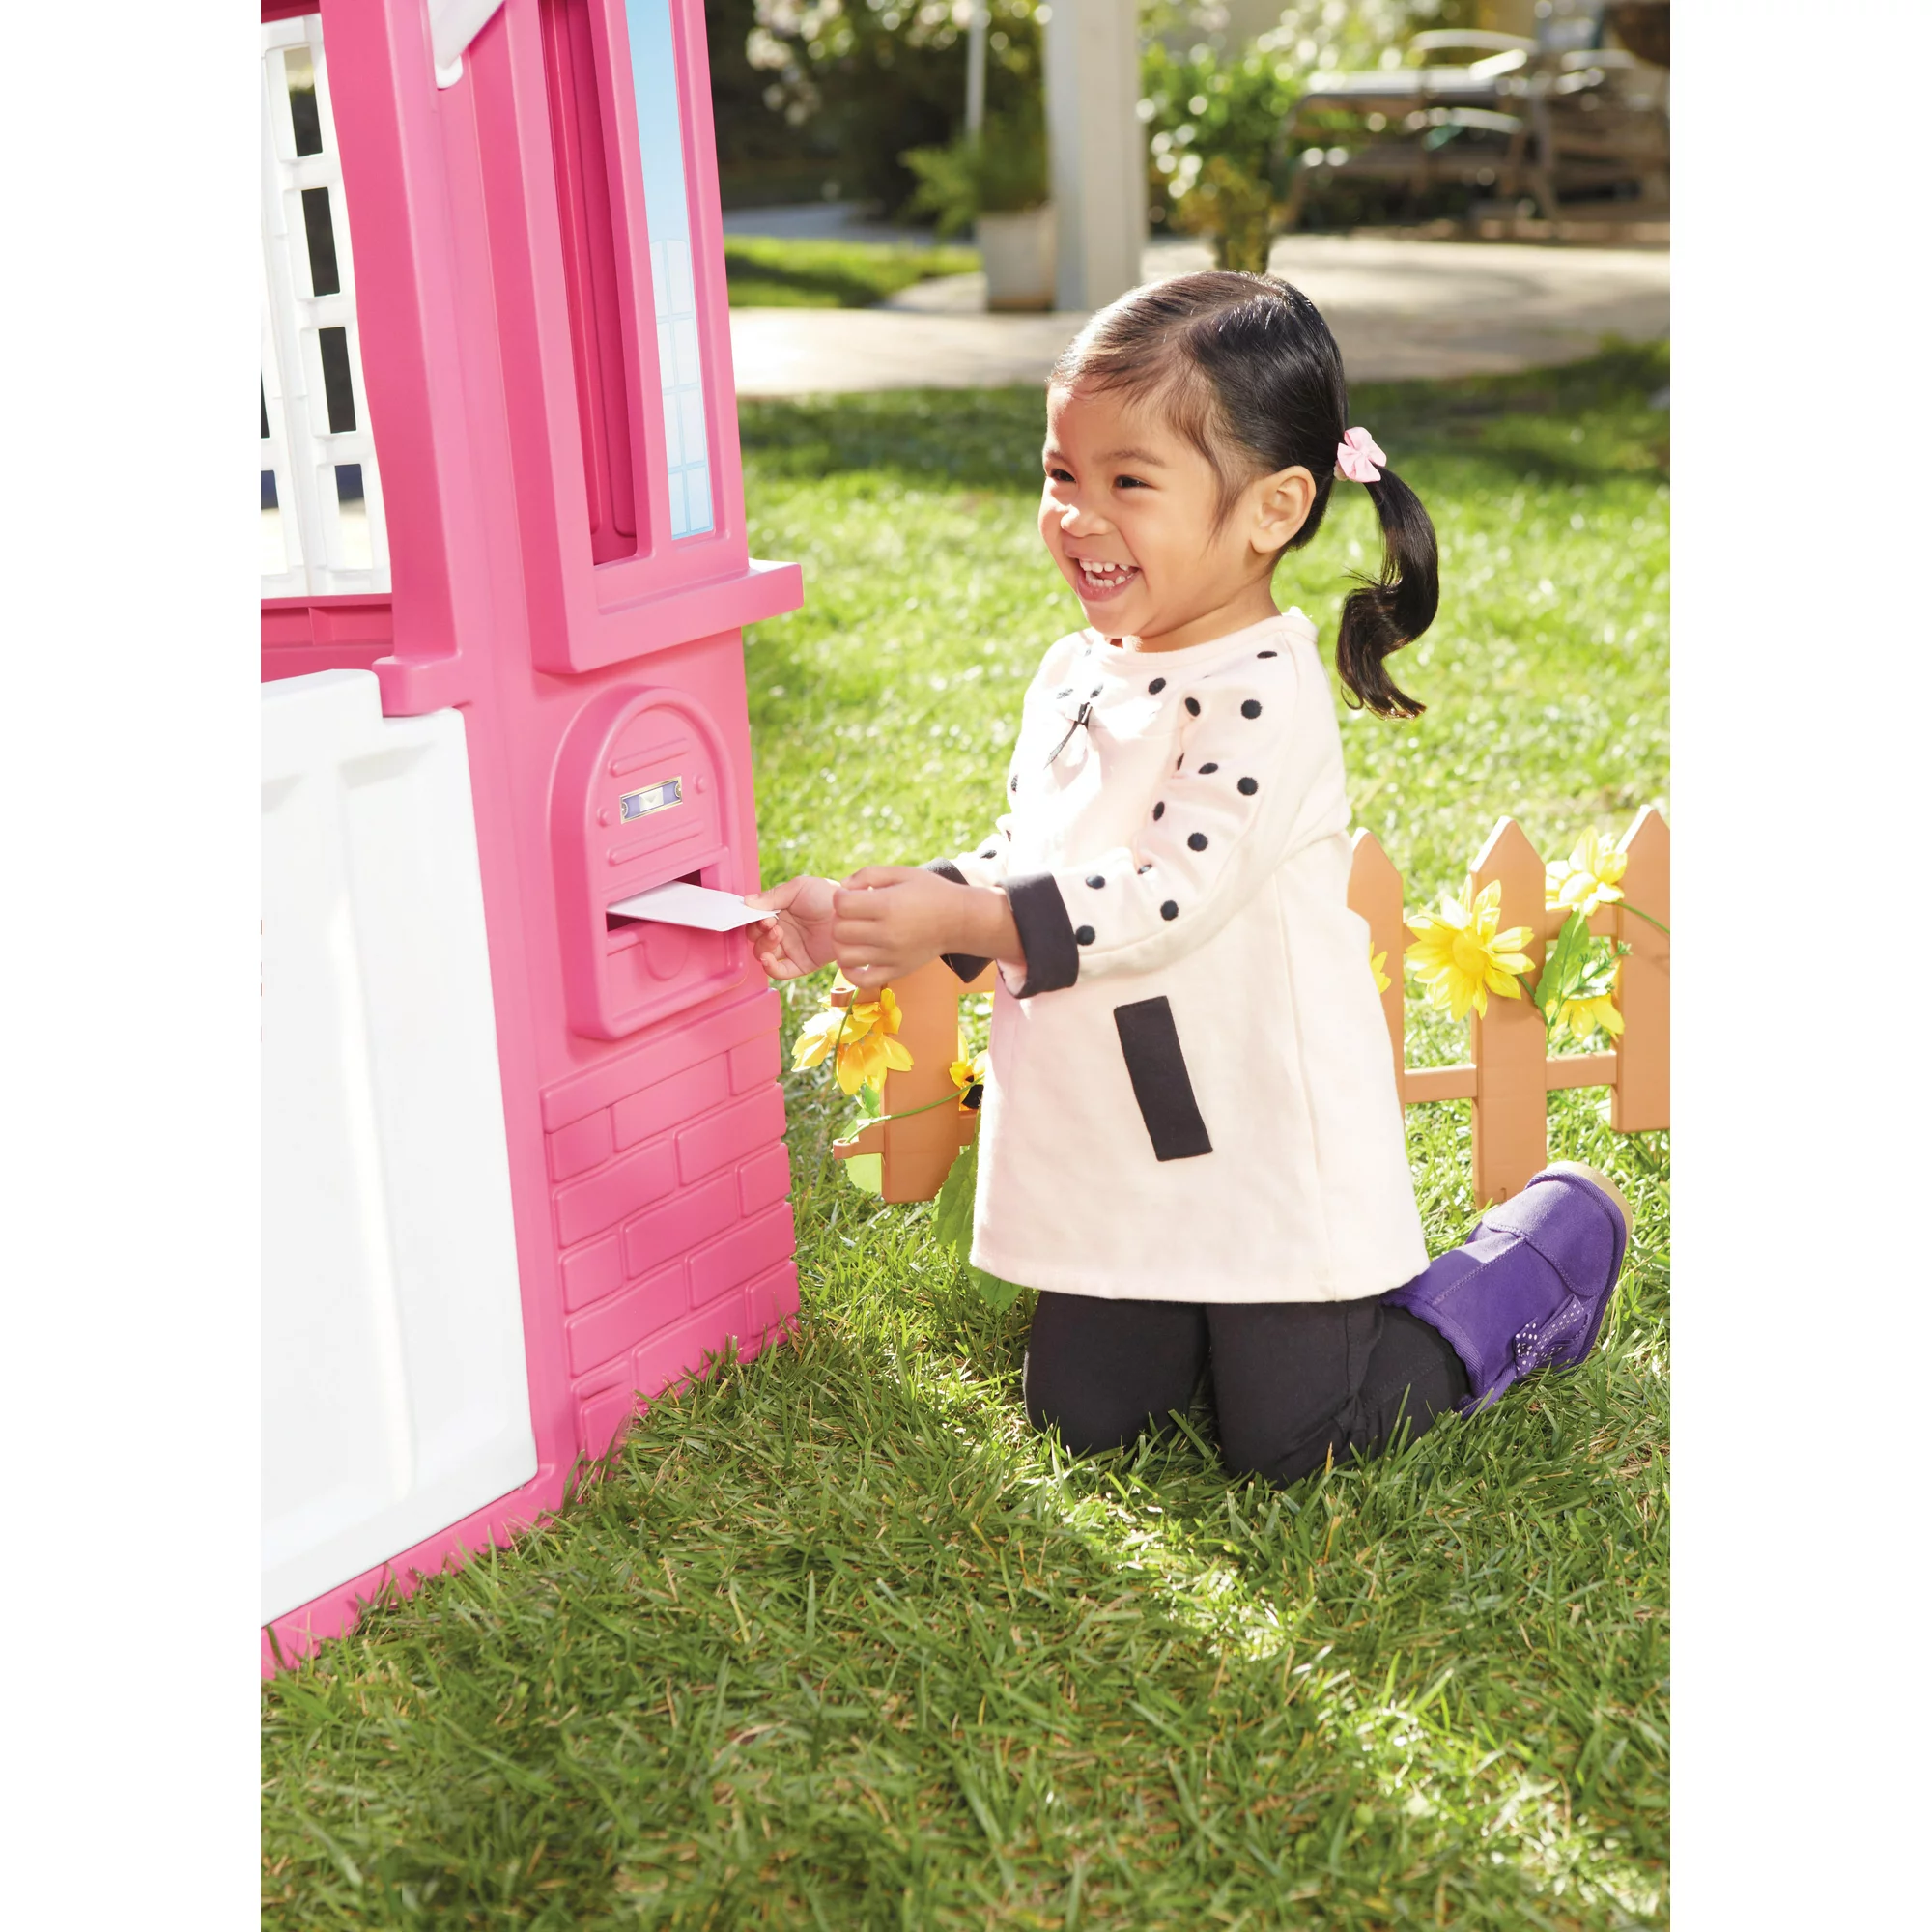 Little Tikes Cape Cottage House, Pink - Pretend Playhouse for Girls Boys  Kids 2-8 Years Old